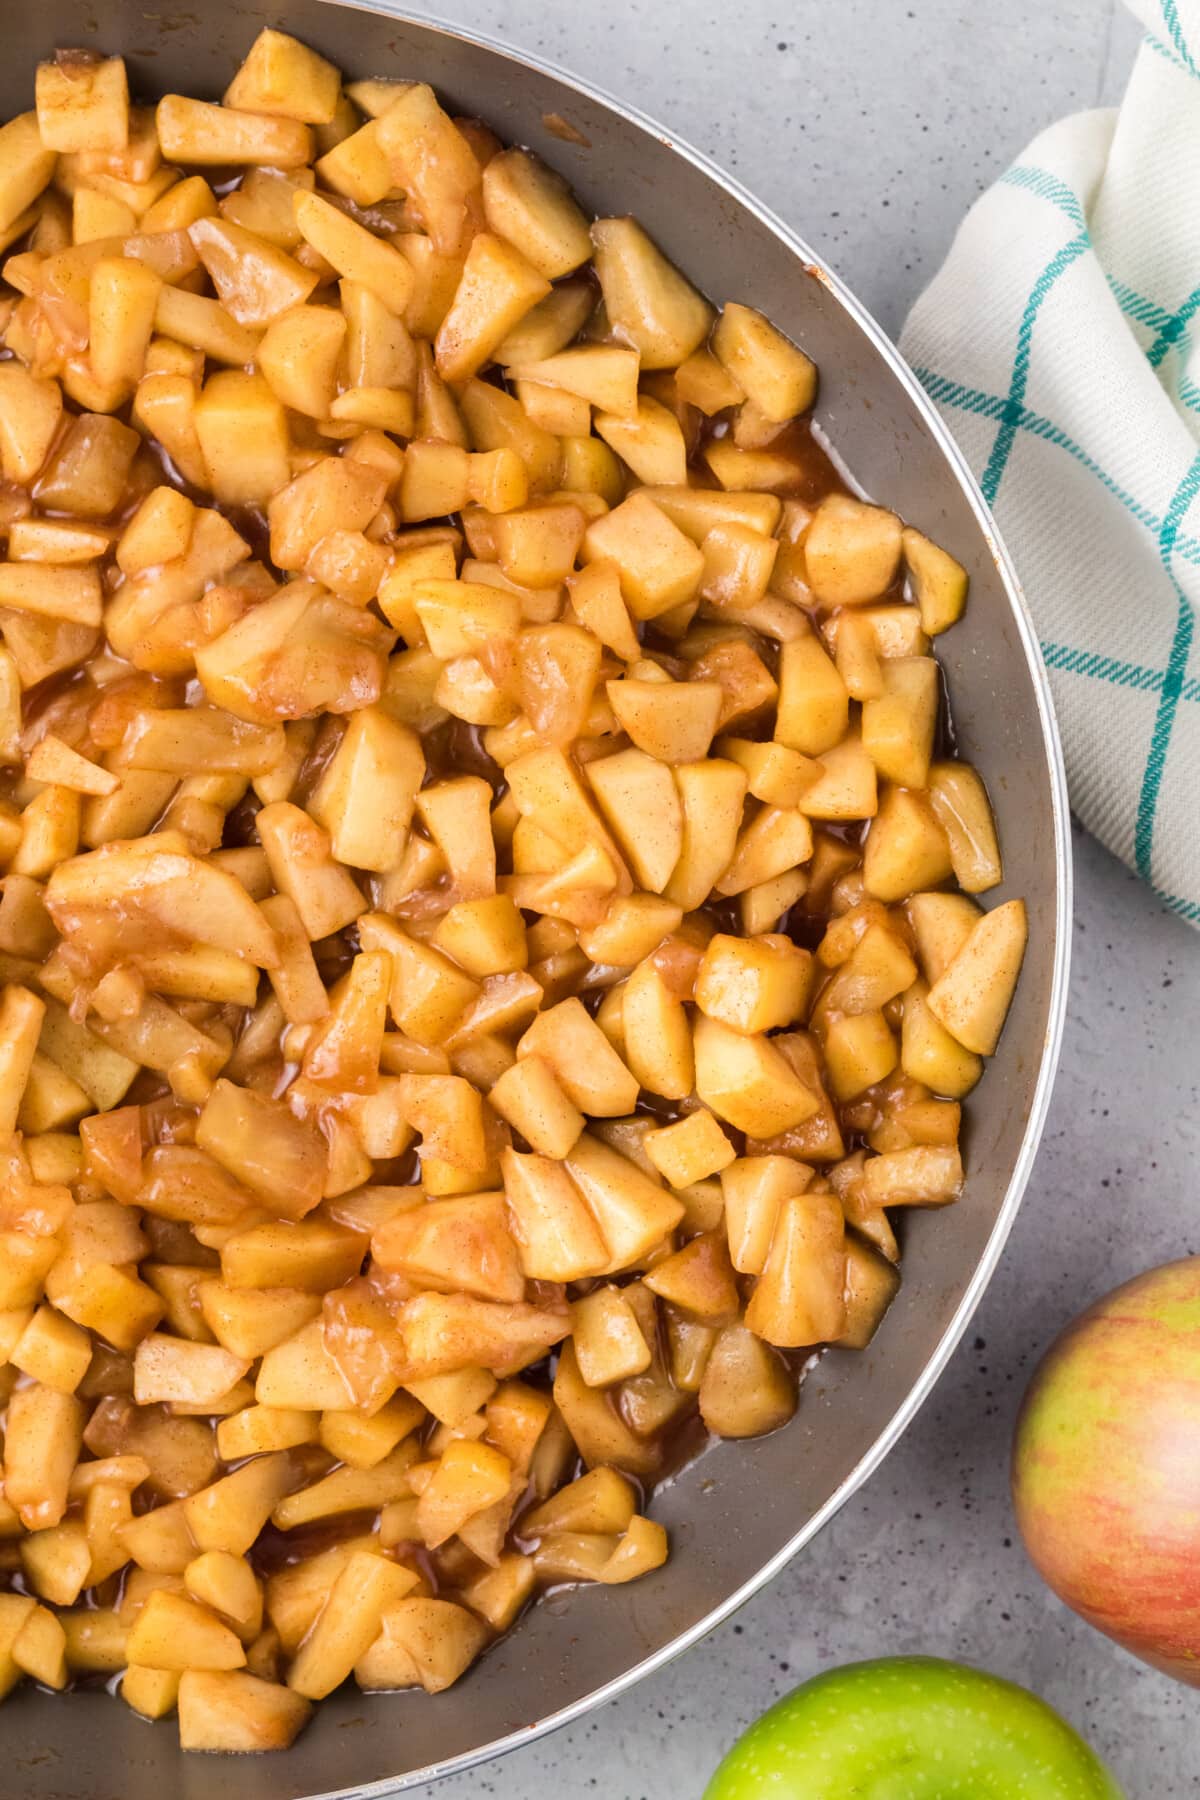 Chopped Apples in a pan